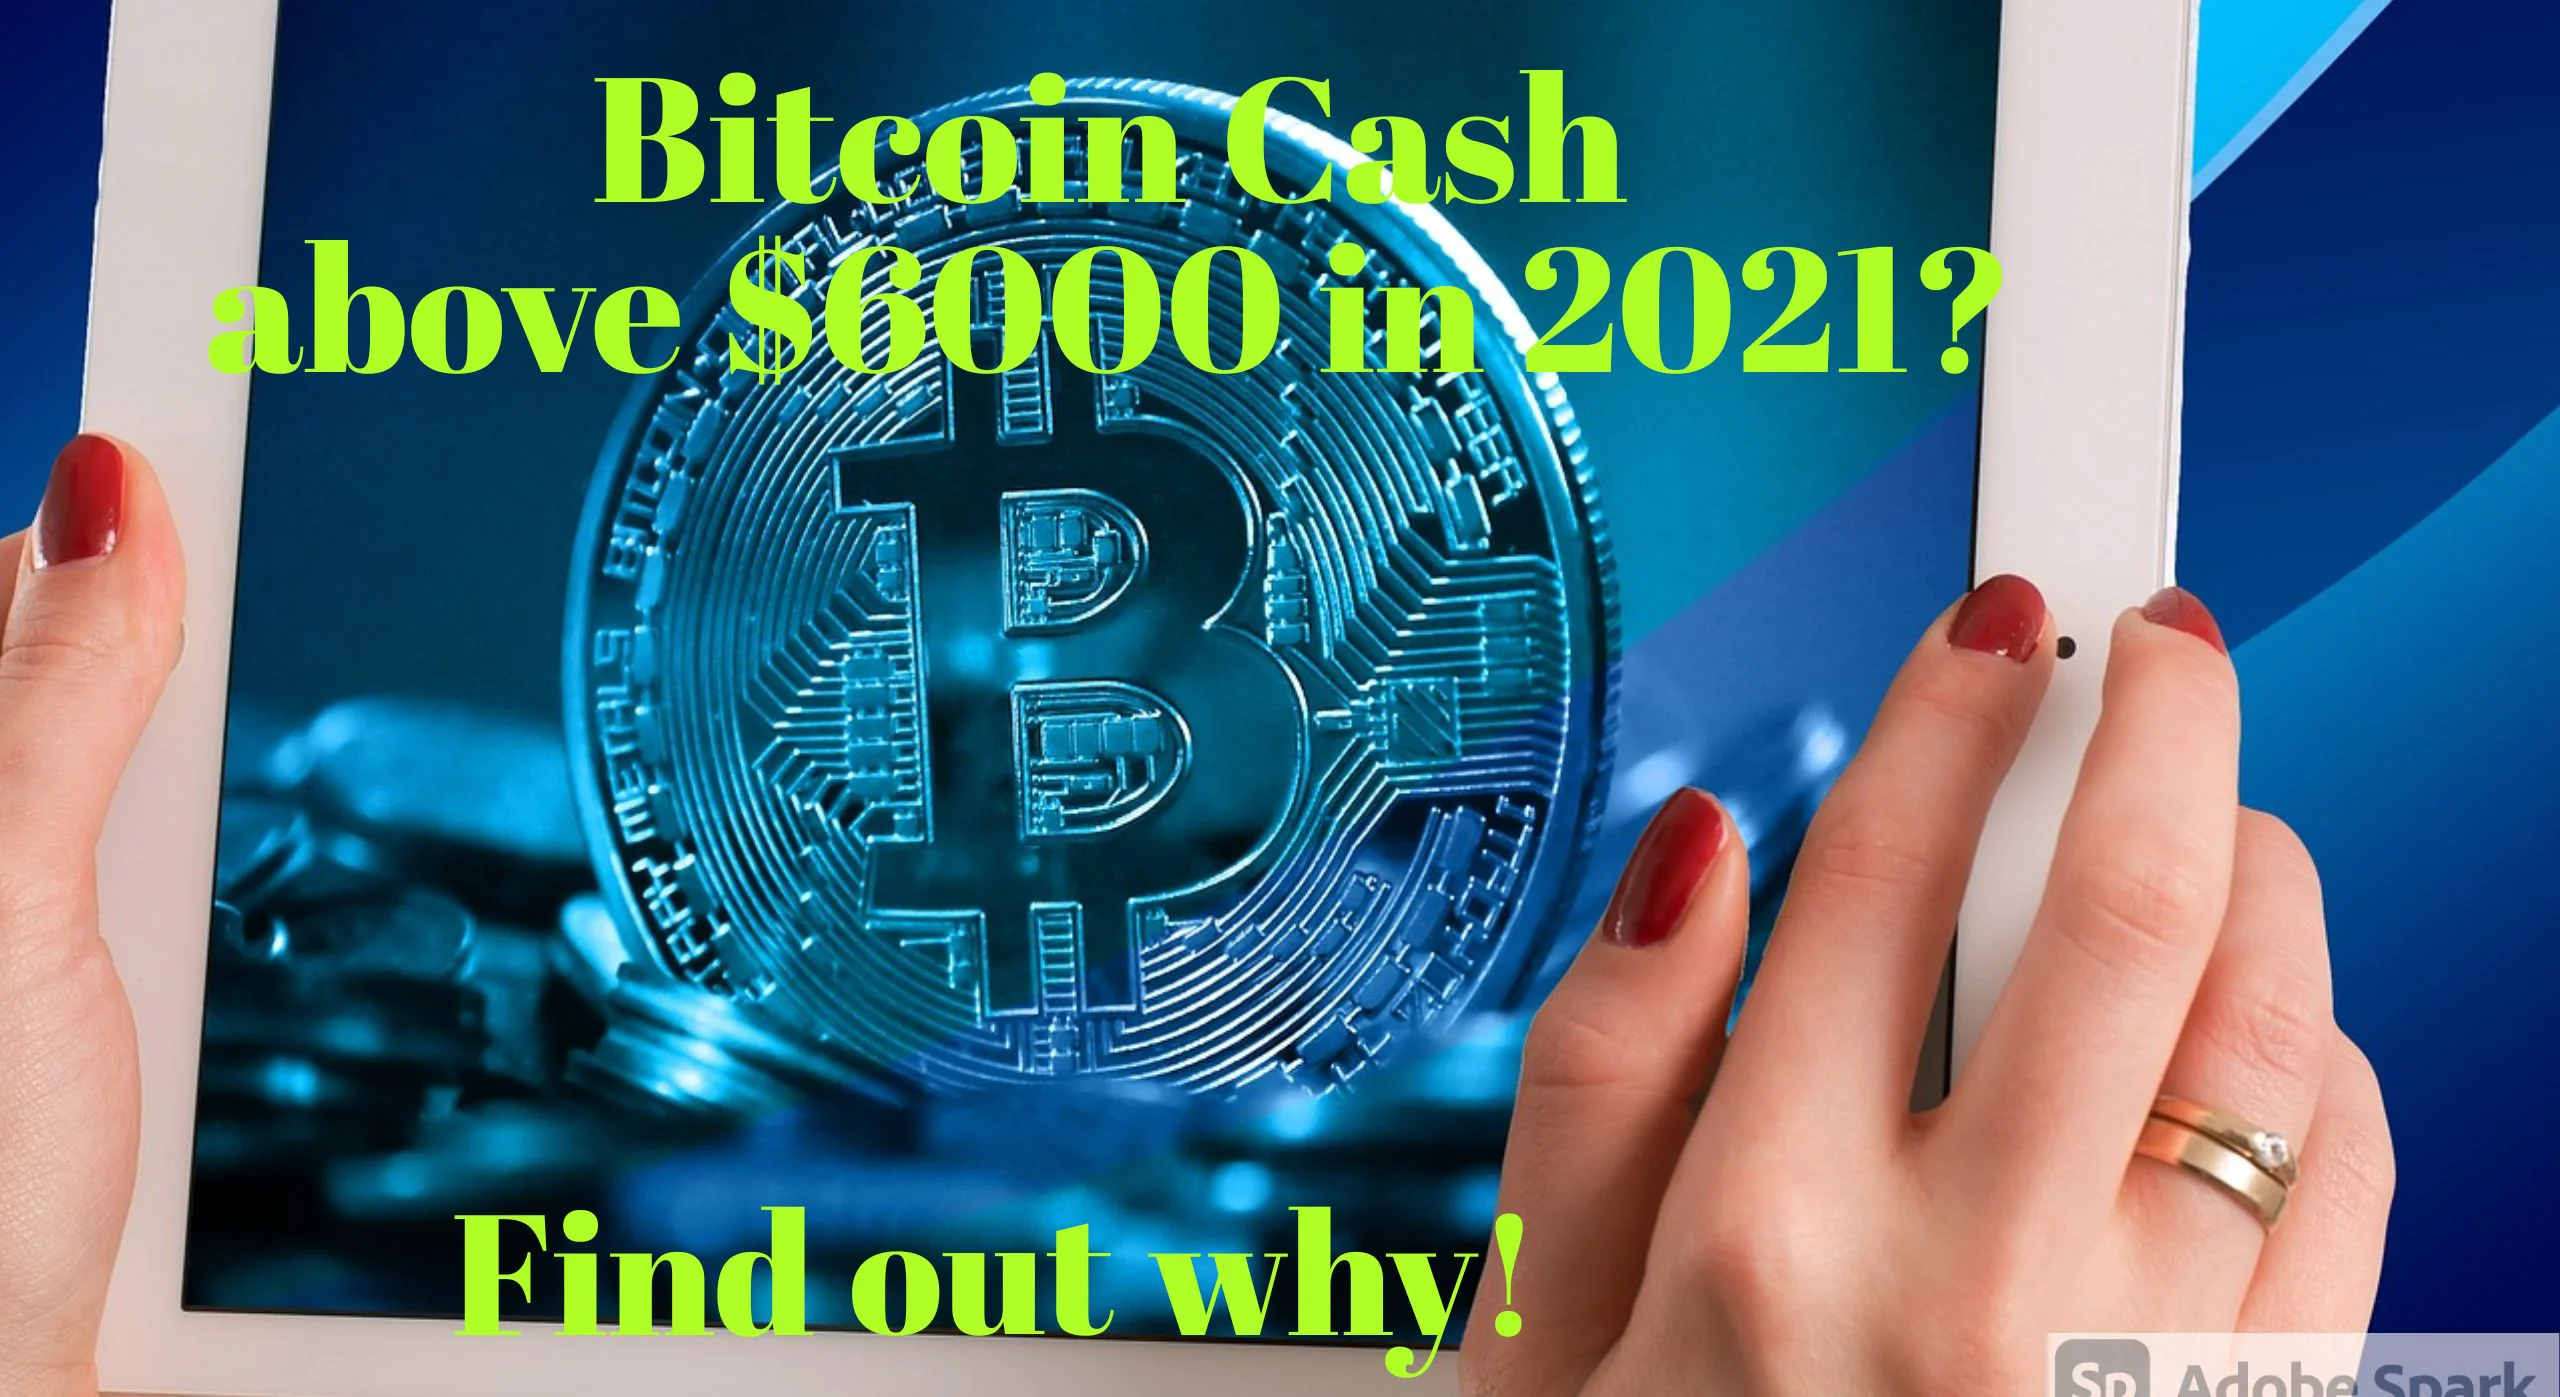 can i buy bitcoin cash on bitstamp